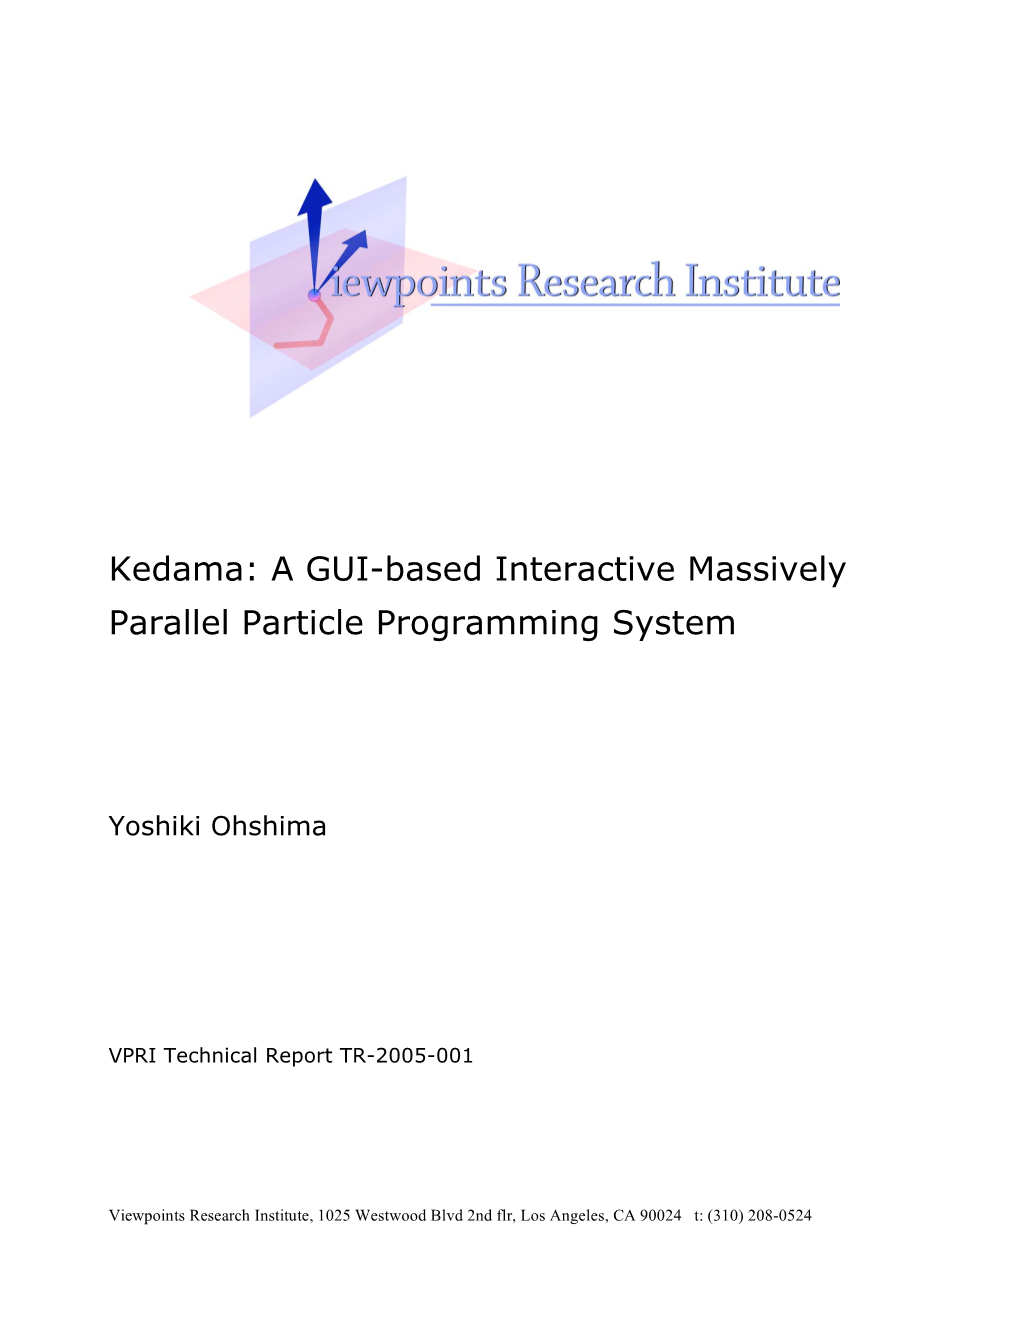 Kedama: a GUI-Based Interactive Massively Parallel Particle Programming System